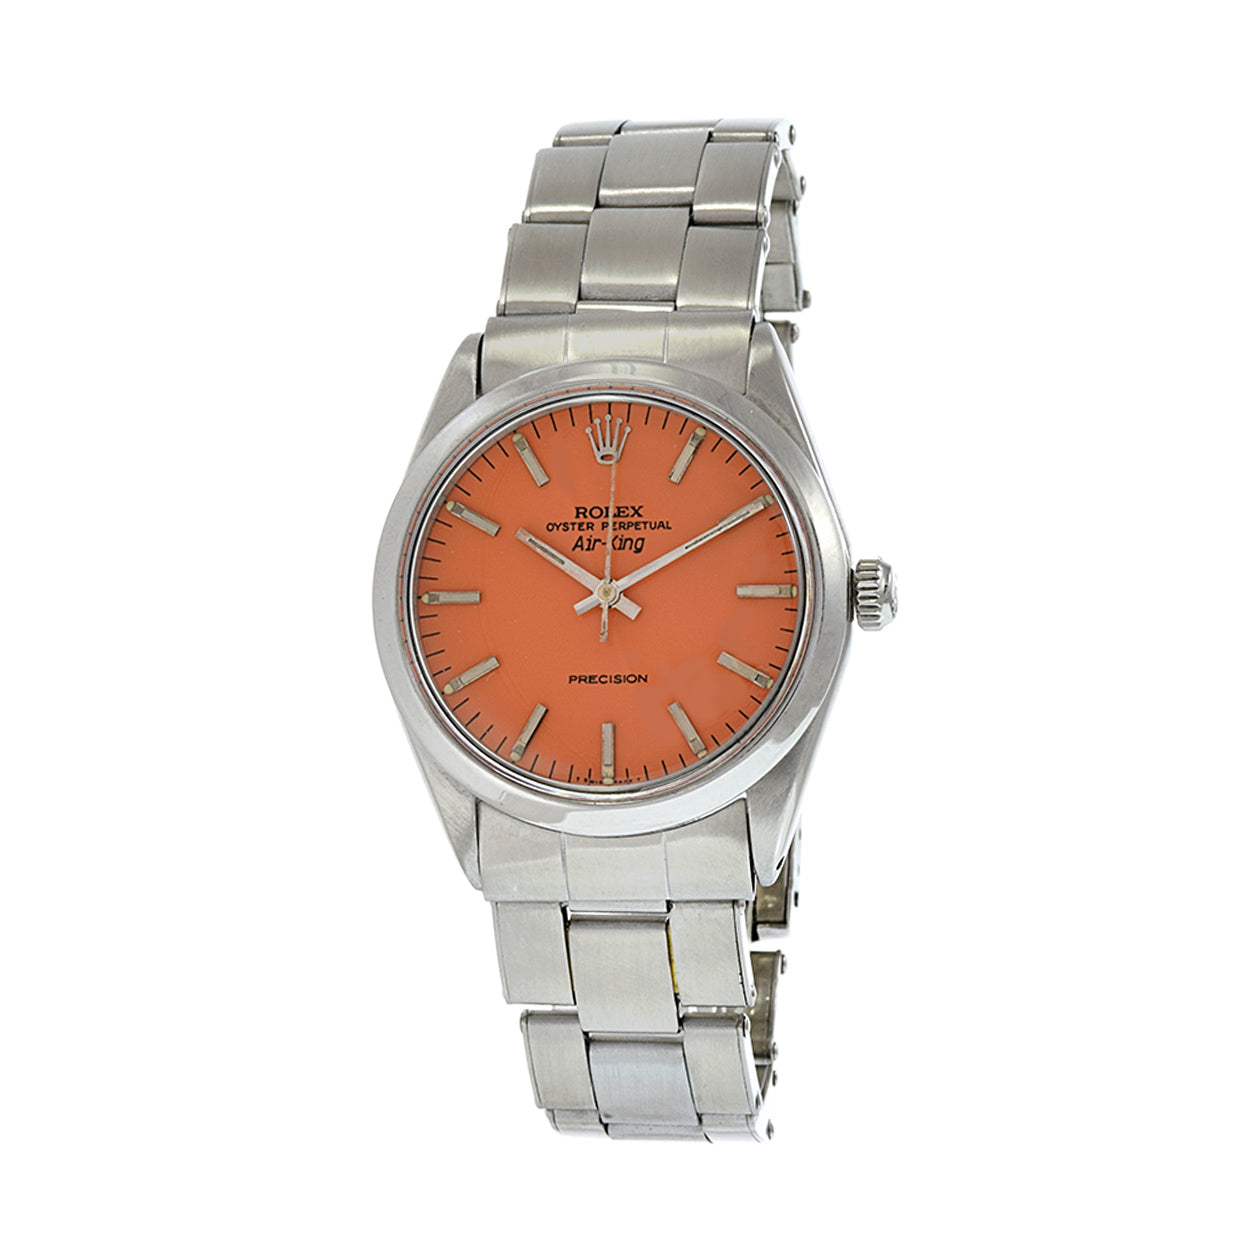 Vintage 1963 Rolex Air-King Reference 5500 Custom Orange Dial Automatic Watch